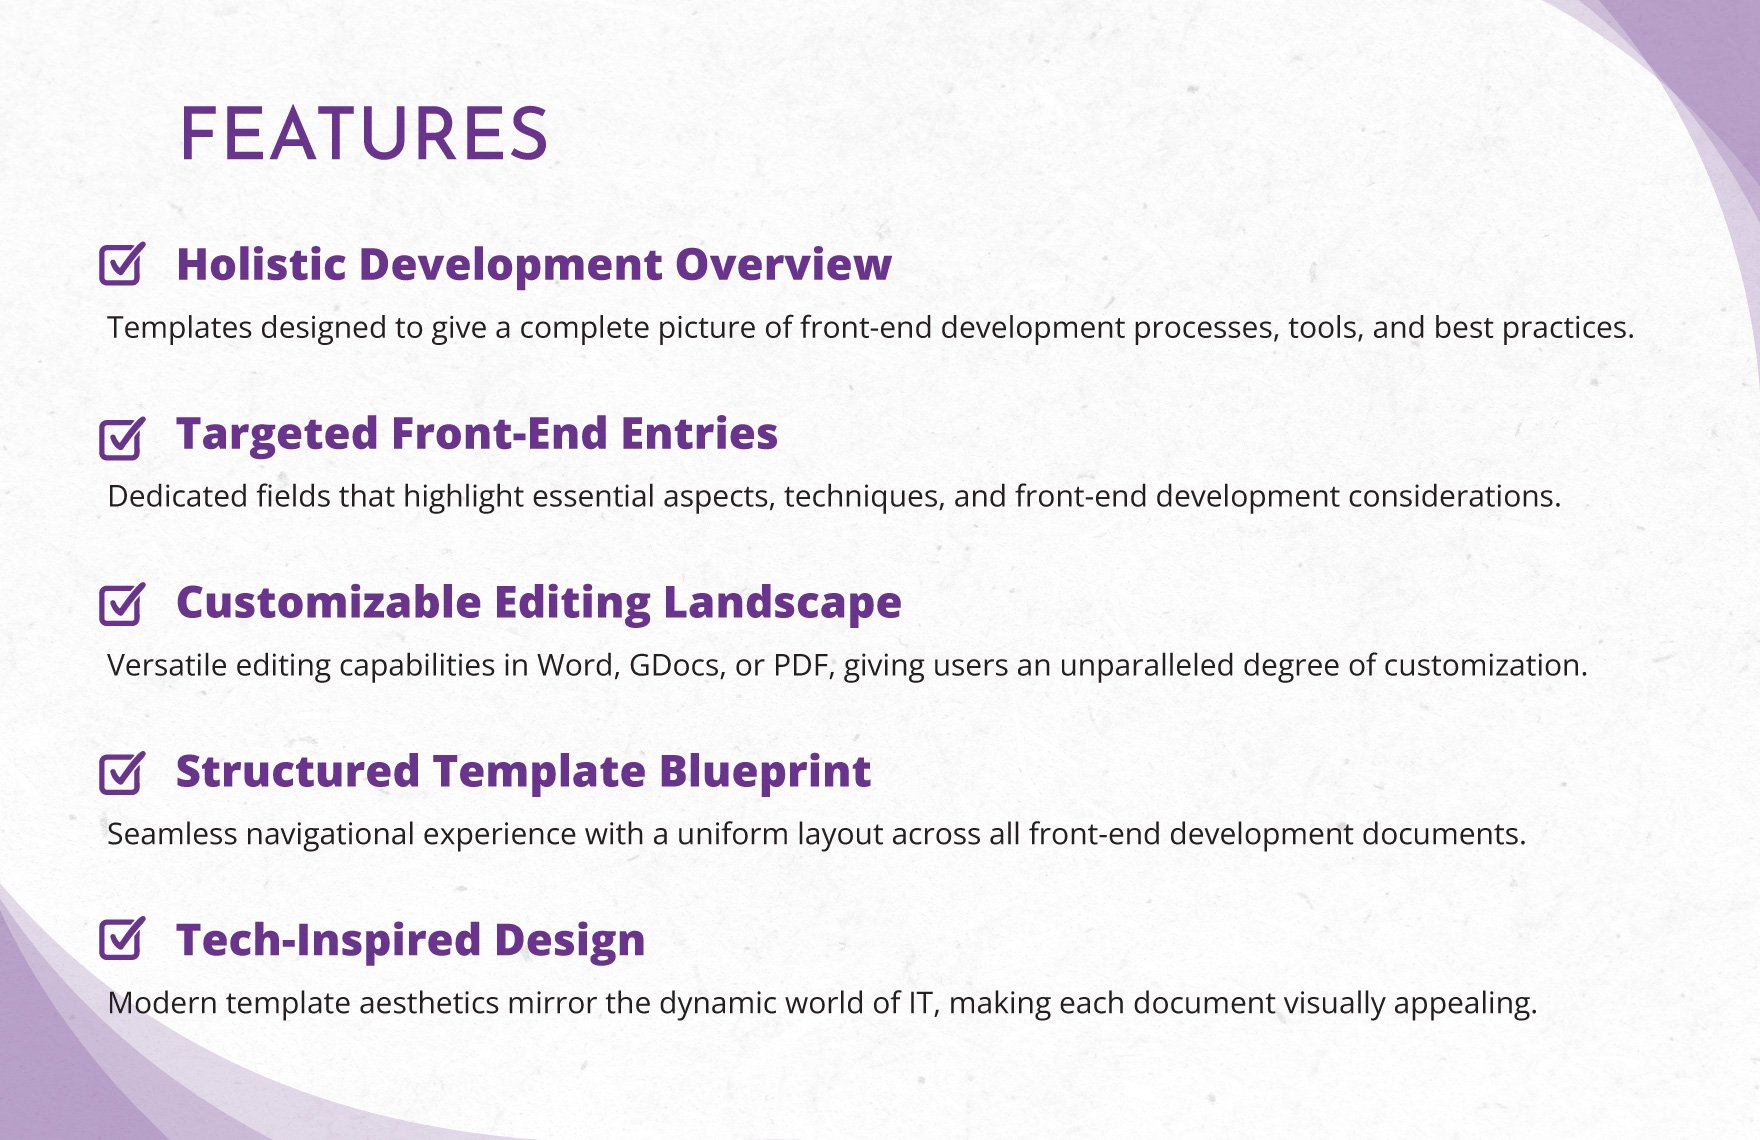 IT Back-End Architecture Documentation Template